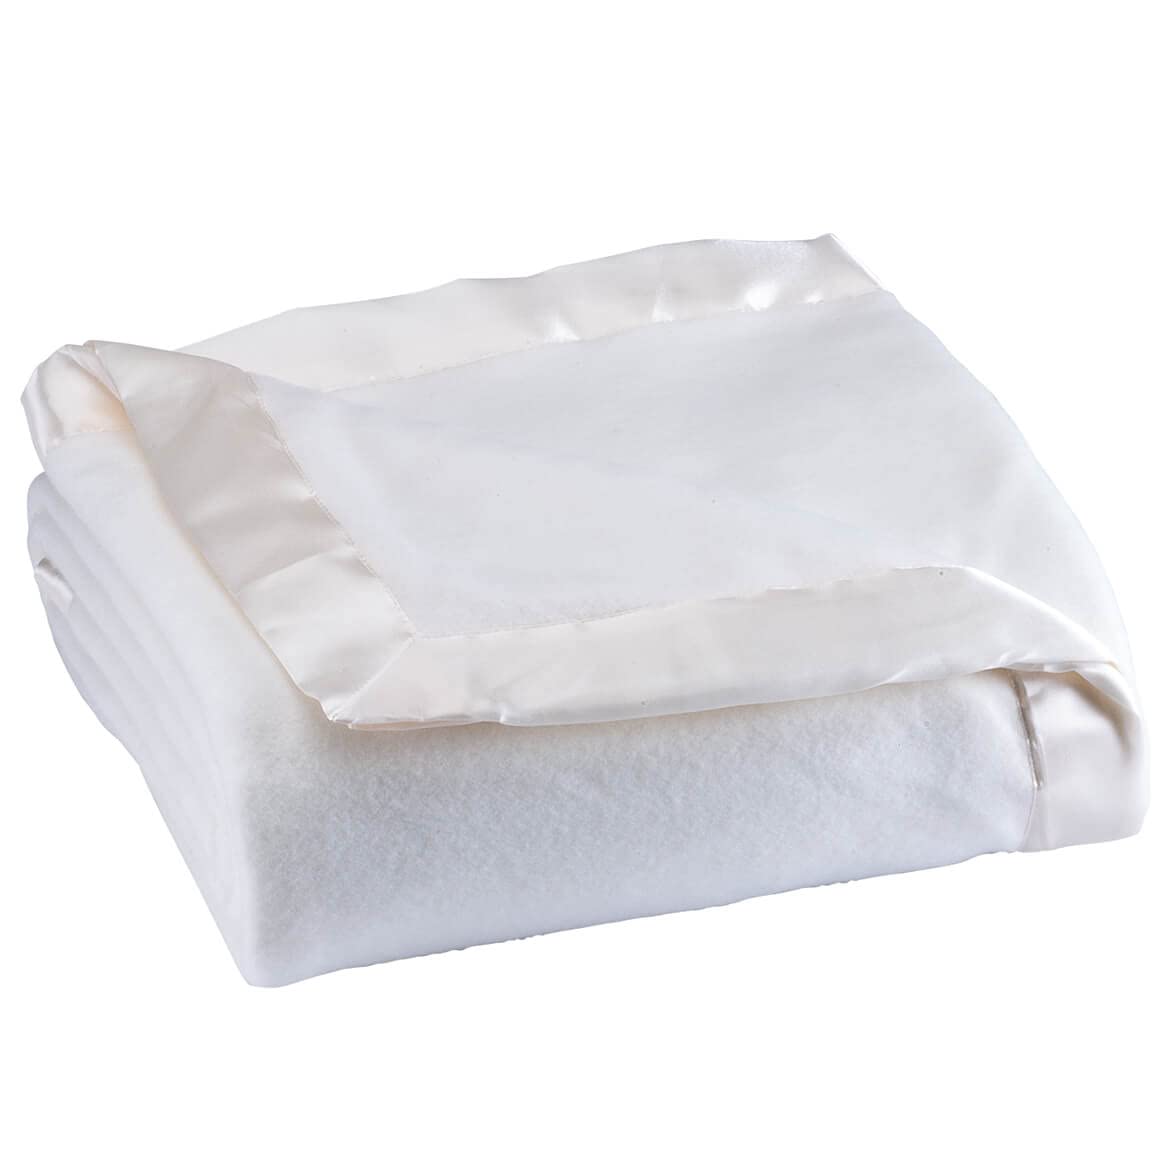 Book Cover OakRidge Satin Fleece Blanket, Full/Queen, Twin or King Size – 100% Polyester Lightweight Fabric and Cozy Satin Binding Edges in Tightly Folding Travel Blanket, White Off White King